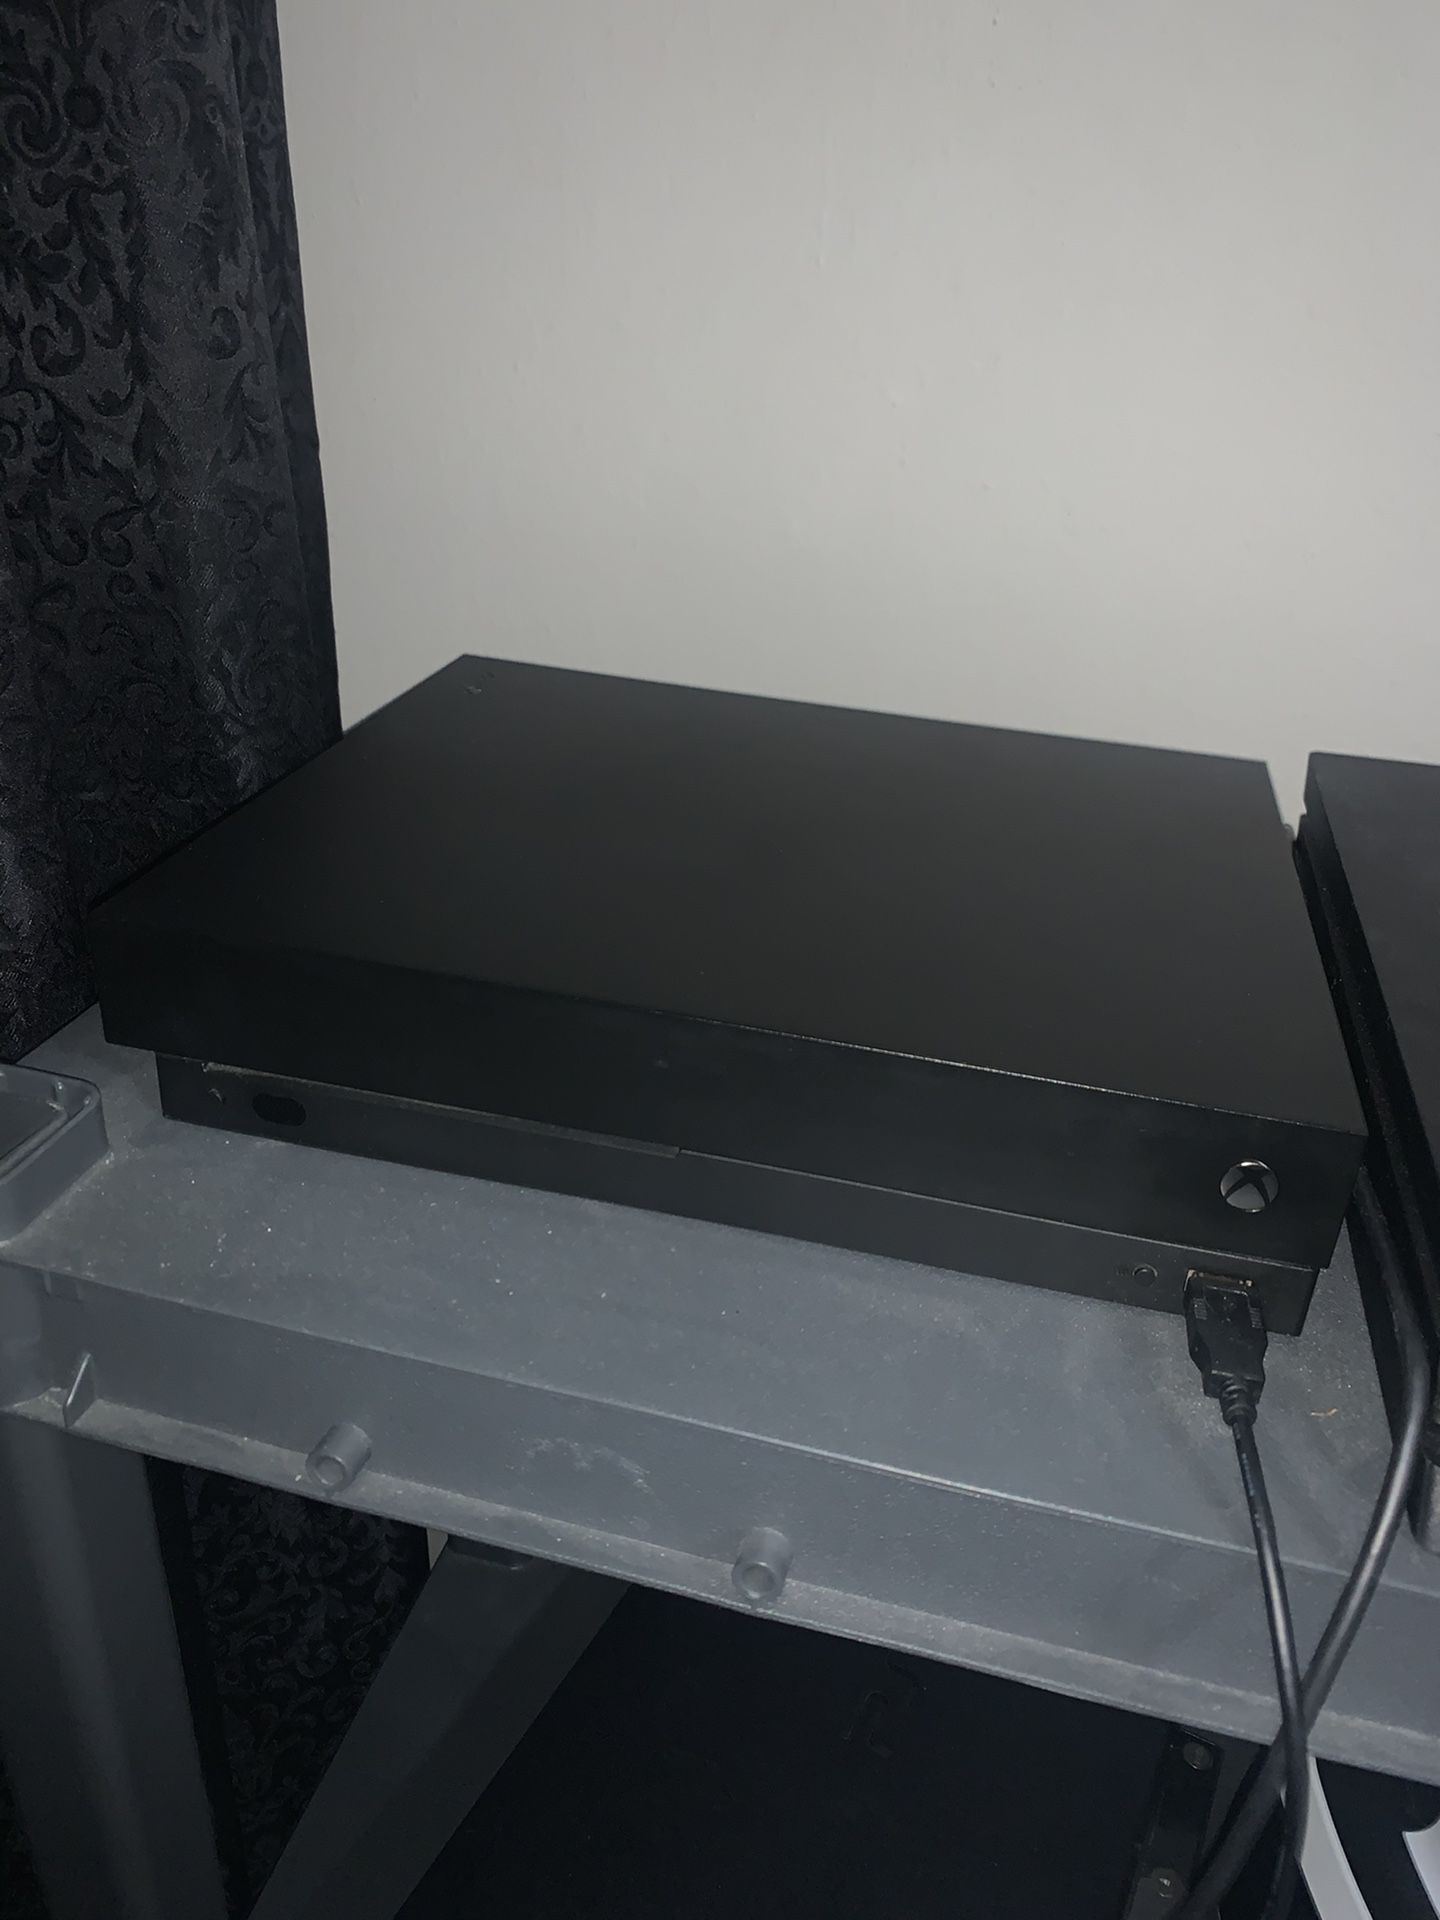 Xbox one X 1Tb in perfect condition includes all cables and a special edition blue controller. Also with Black ops 4. Will do trades!